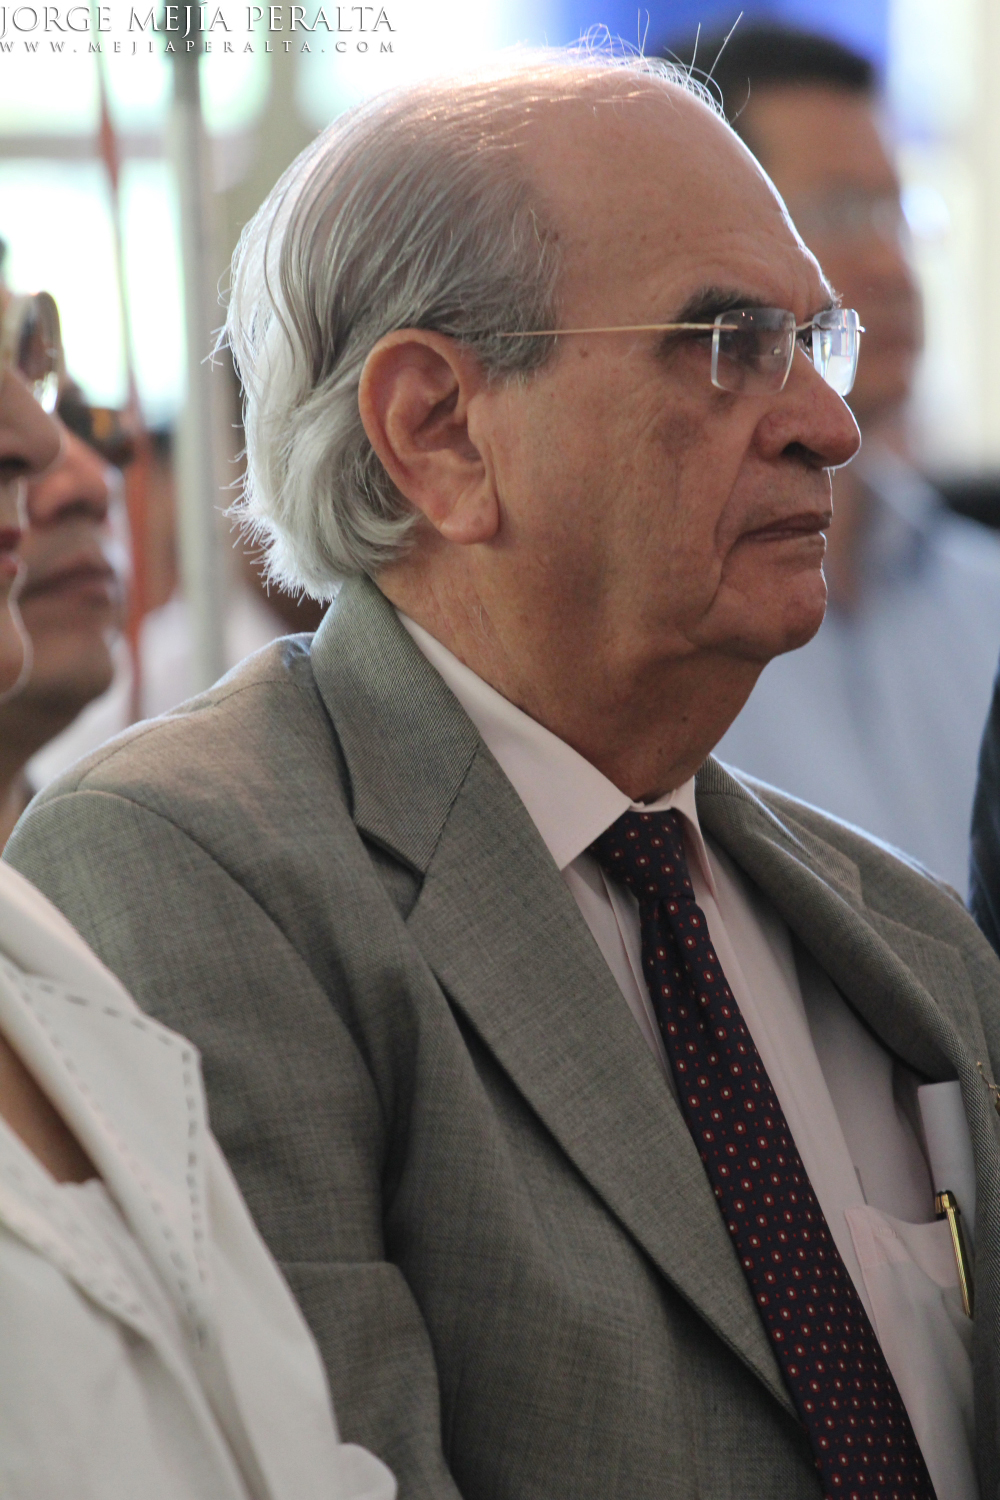 a close up view of an elderly man wearing glasses and a suit